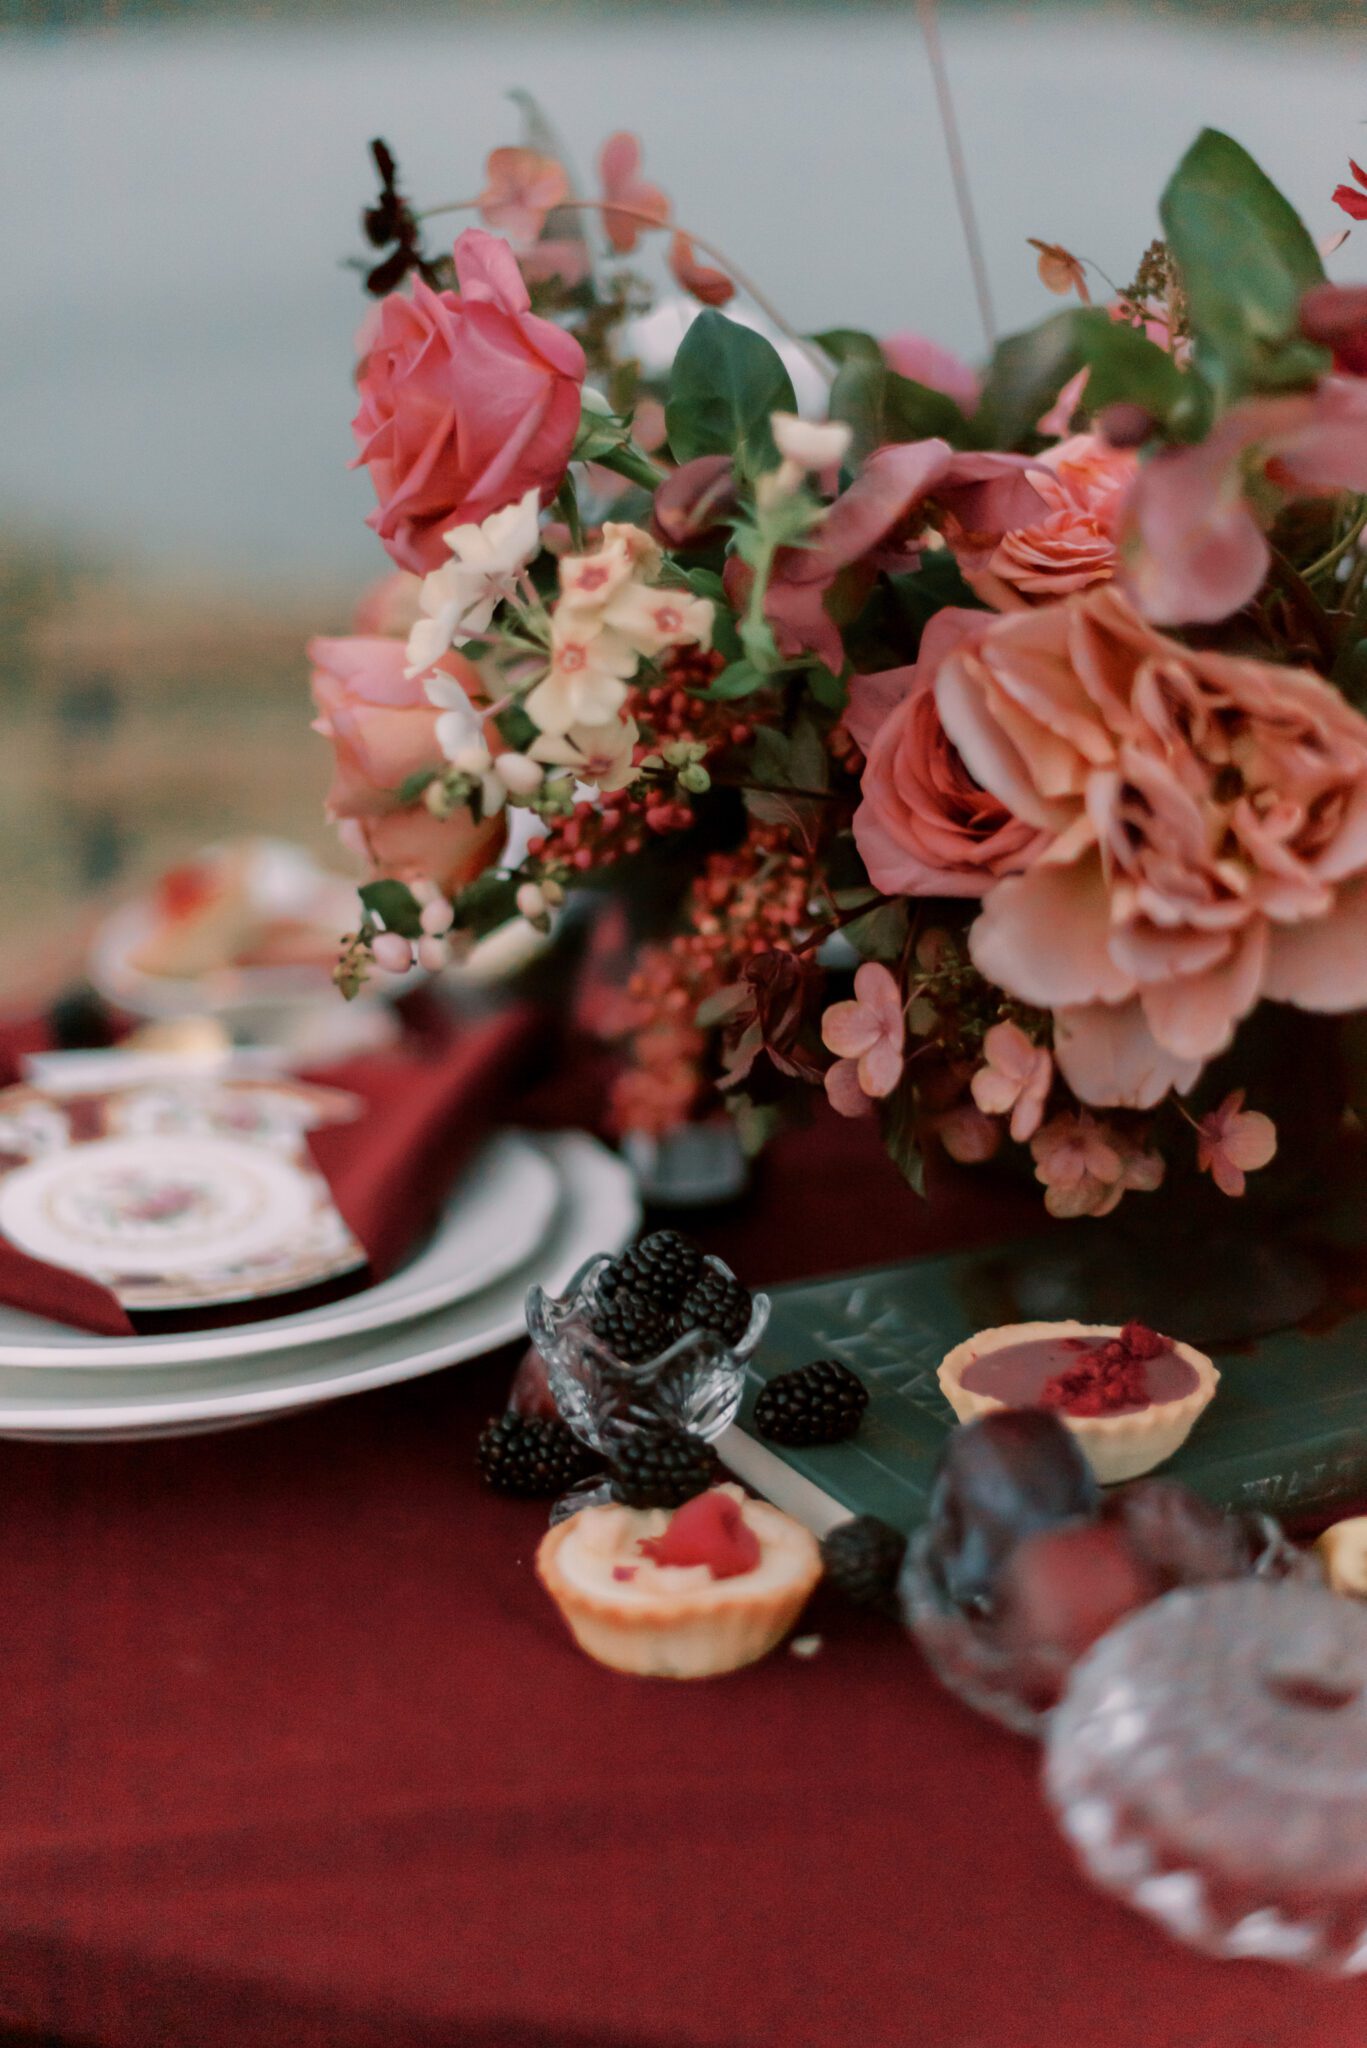 Fall Wedding Inspiration, Merlot and berry toned  florals by Alexandra Victoria Rose, tarts by Lemonberry Pastries